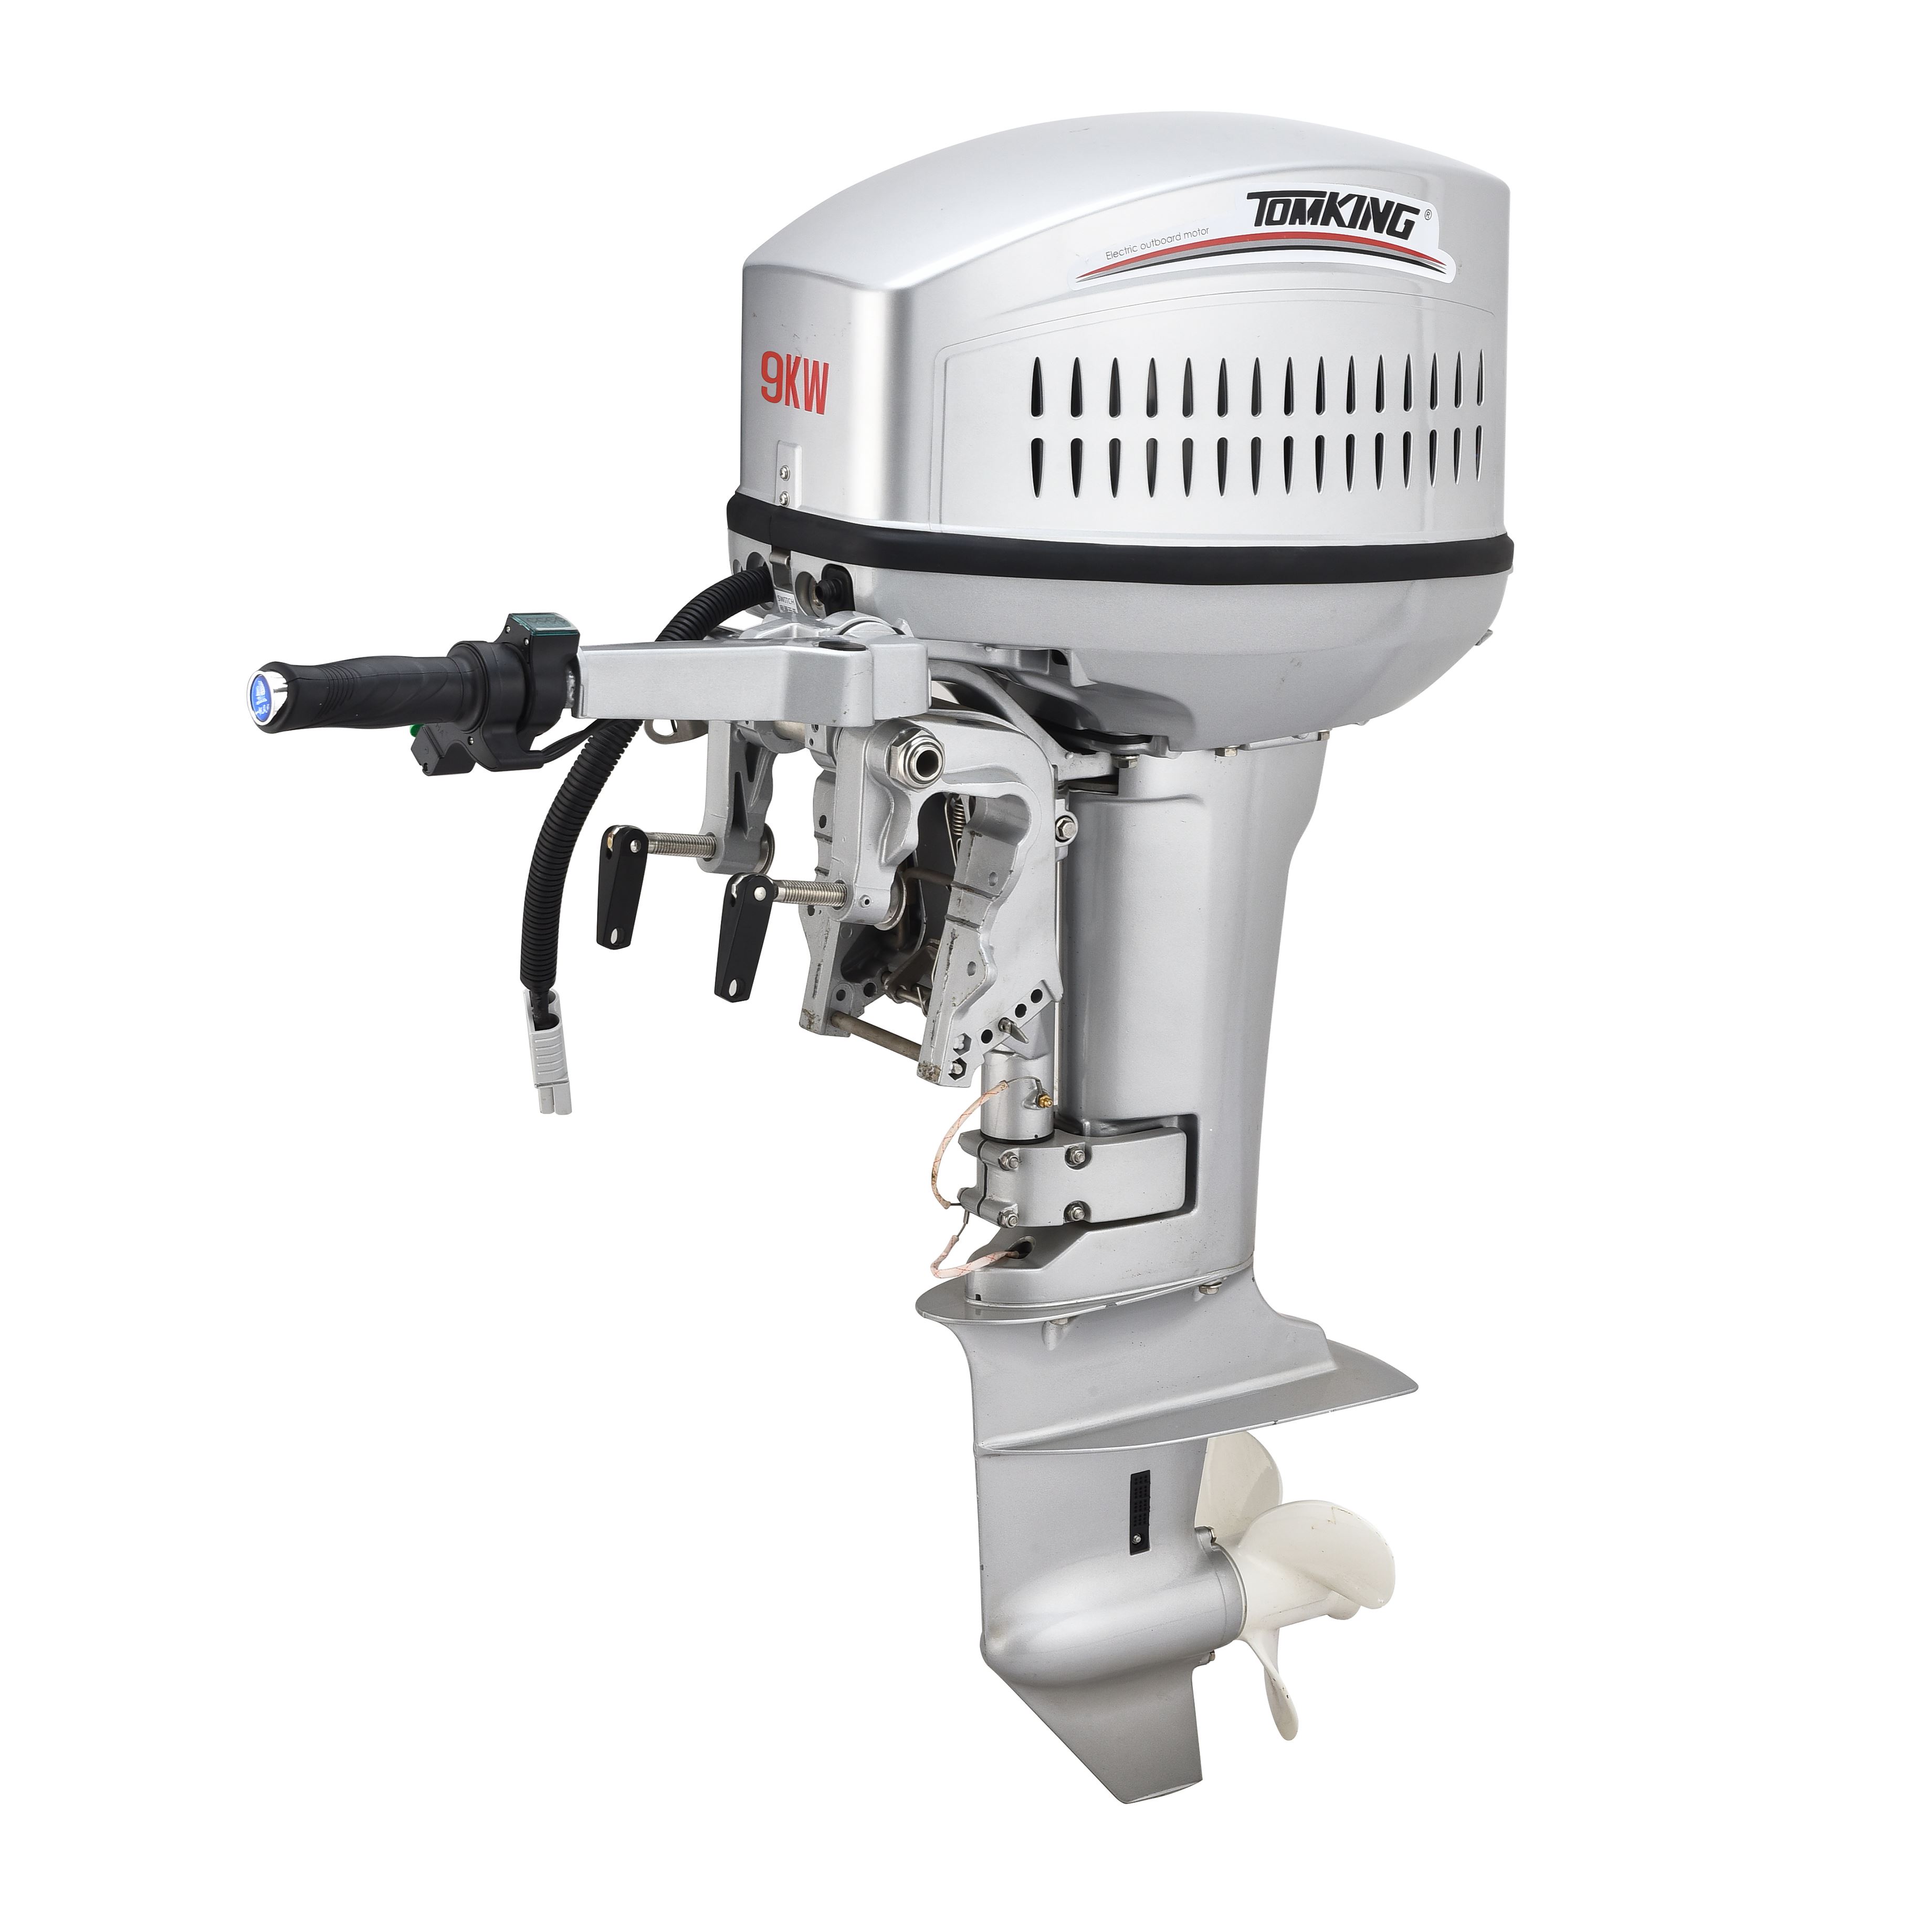 96V 9kW electric outboard motor